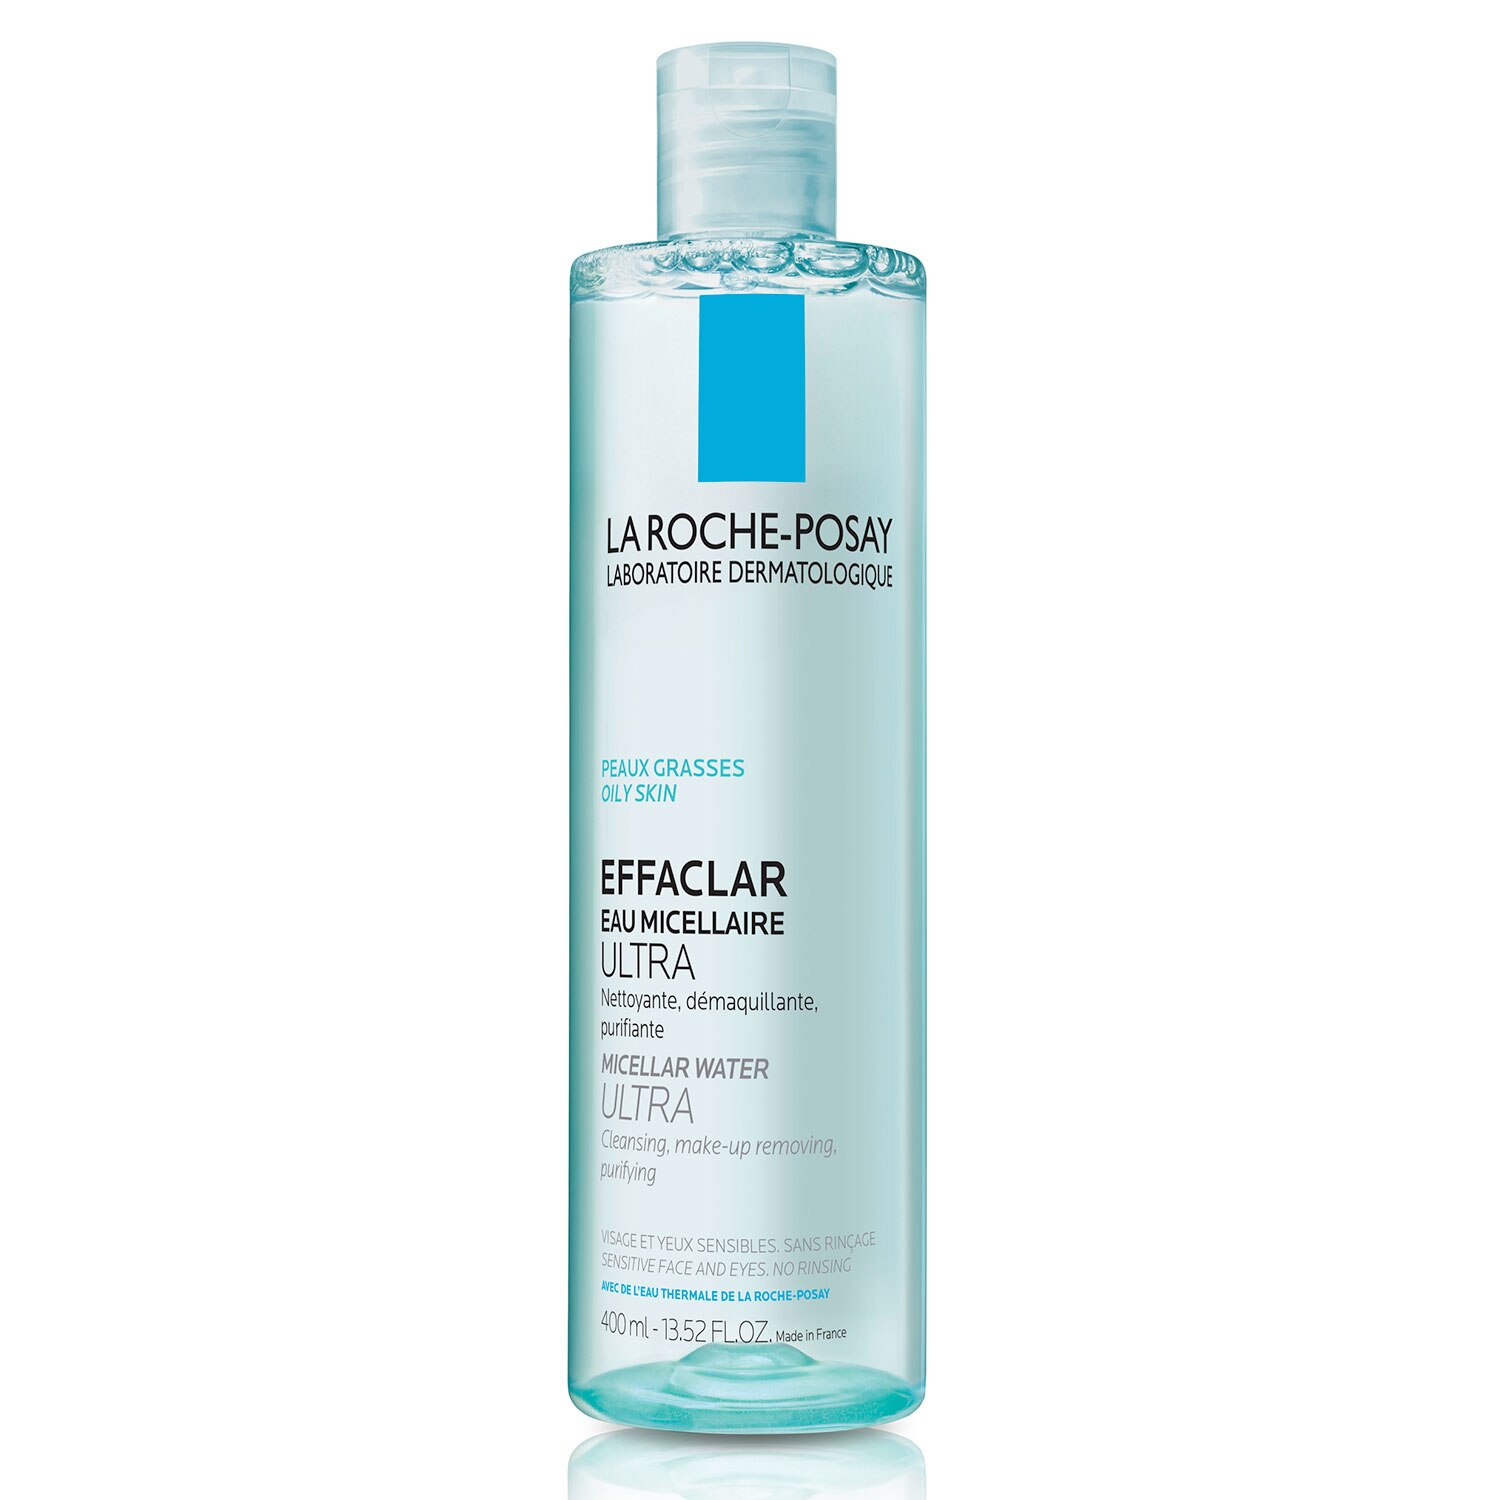 La Roche-Posay Effaclar Micellar Cleansing Water Toner for Oily Skin, Oil Free Makeup Remover for Sensitive Skin